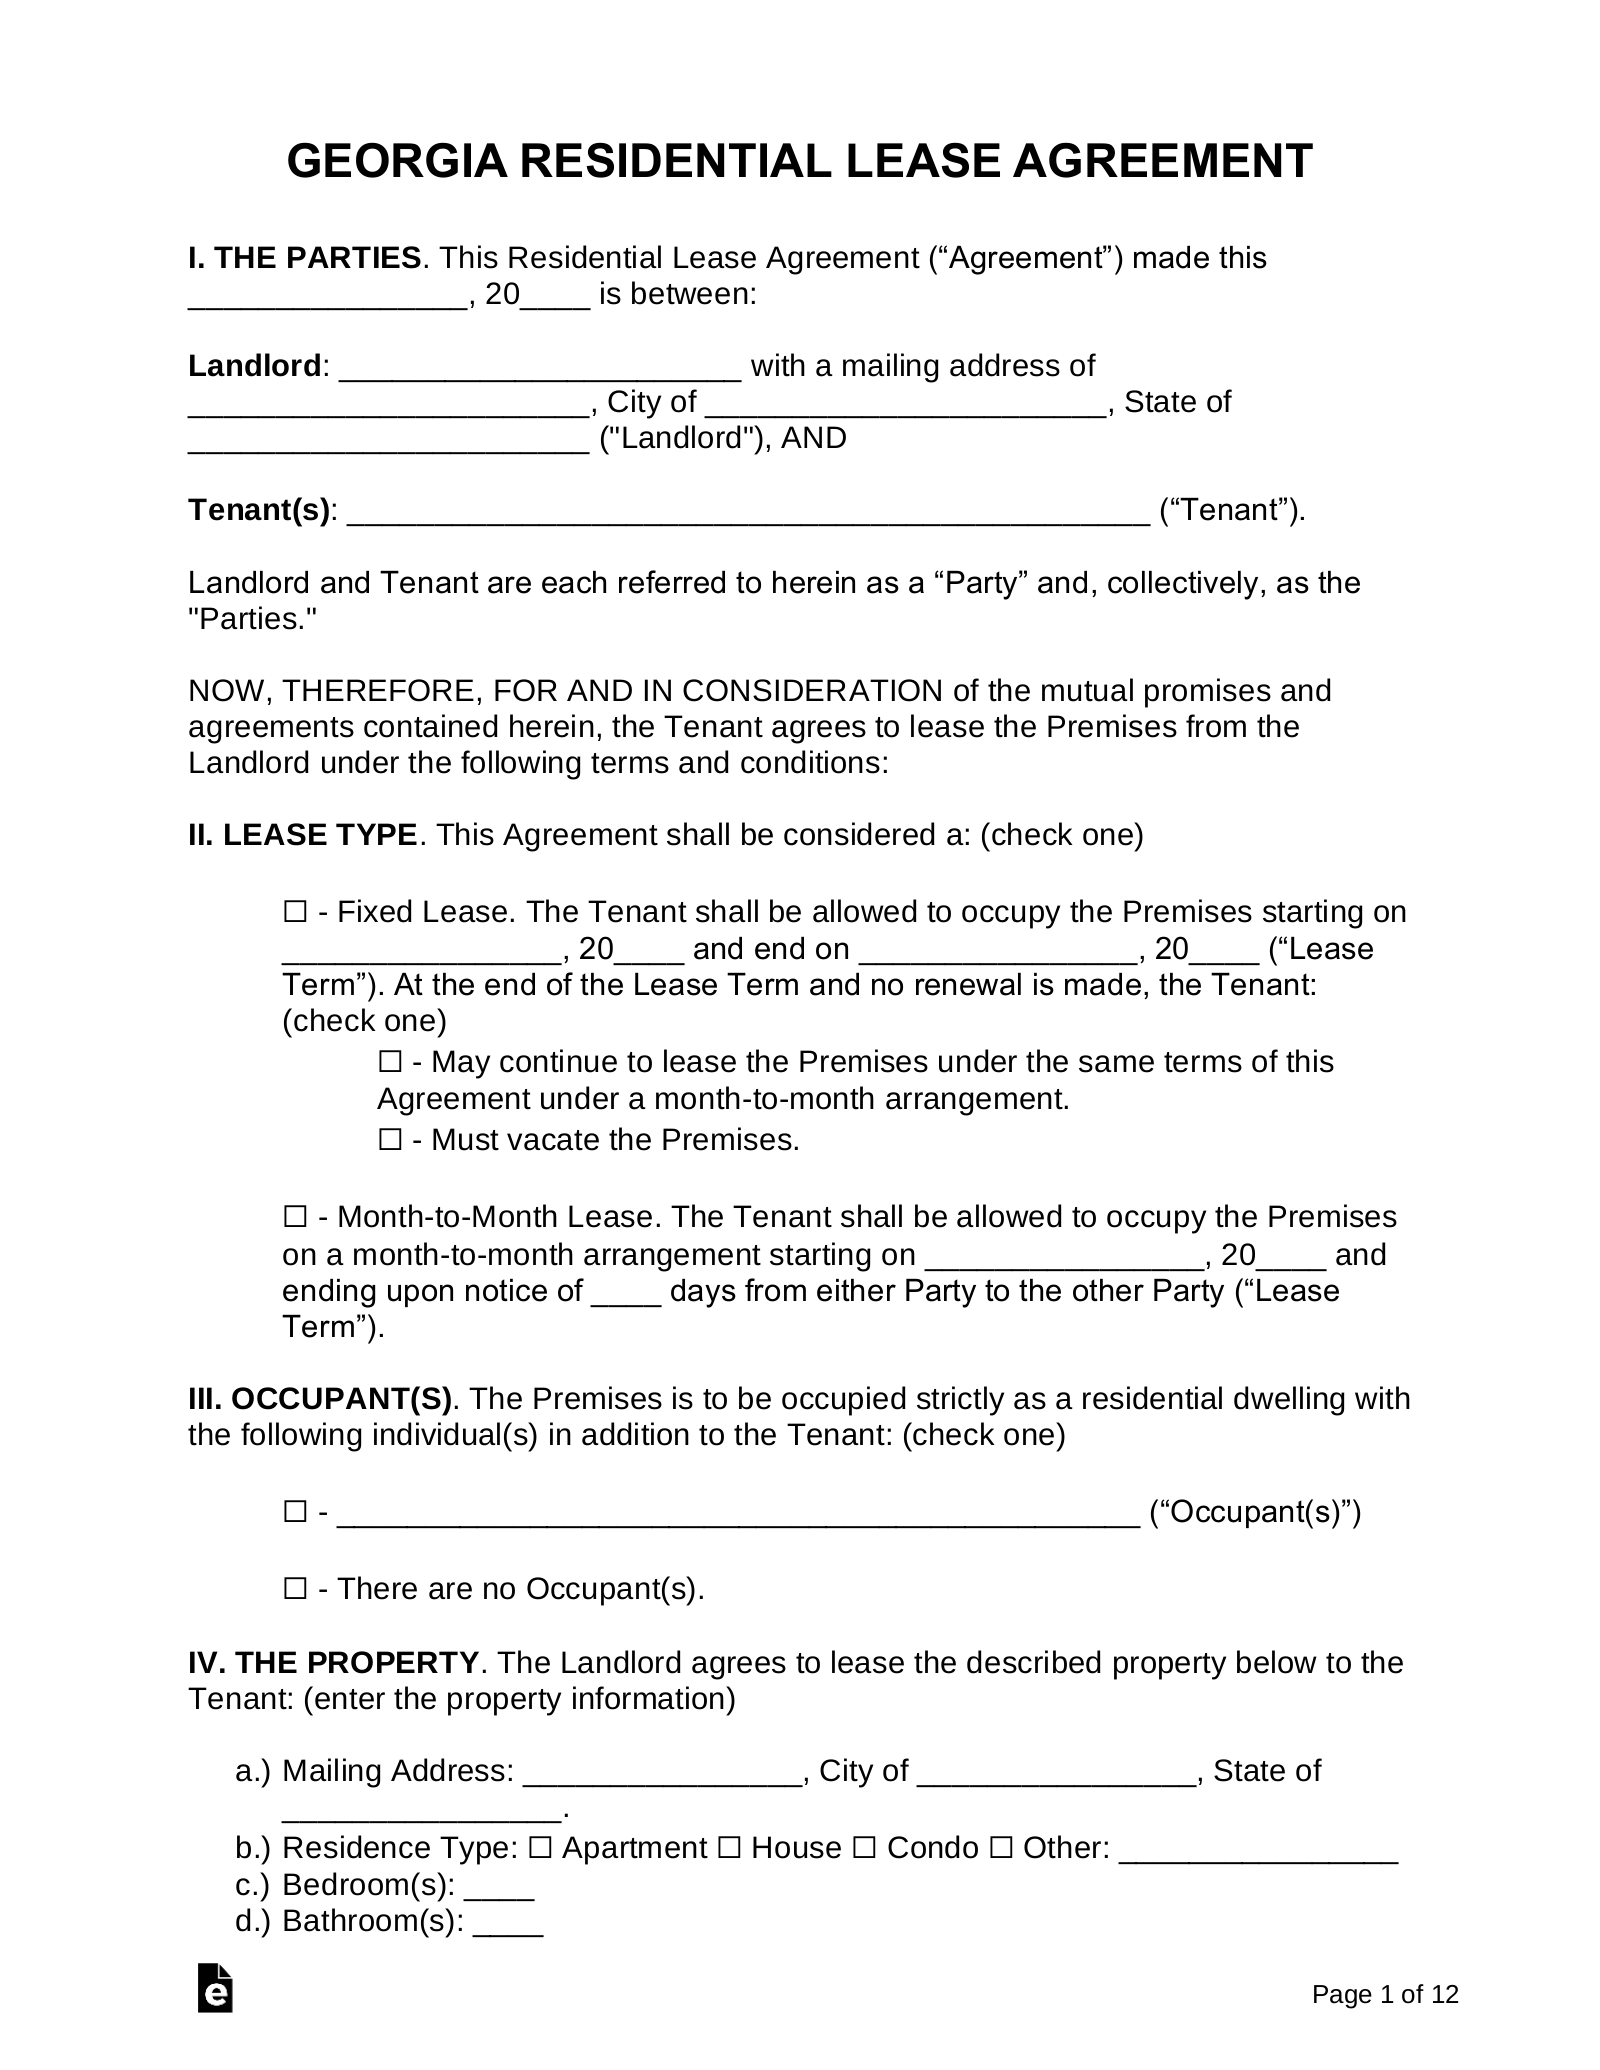 eForms Georgia Residential Lease Agreement